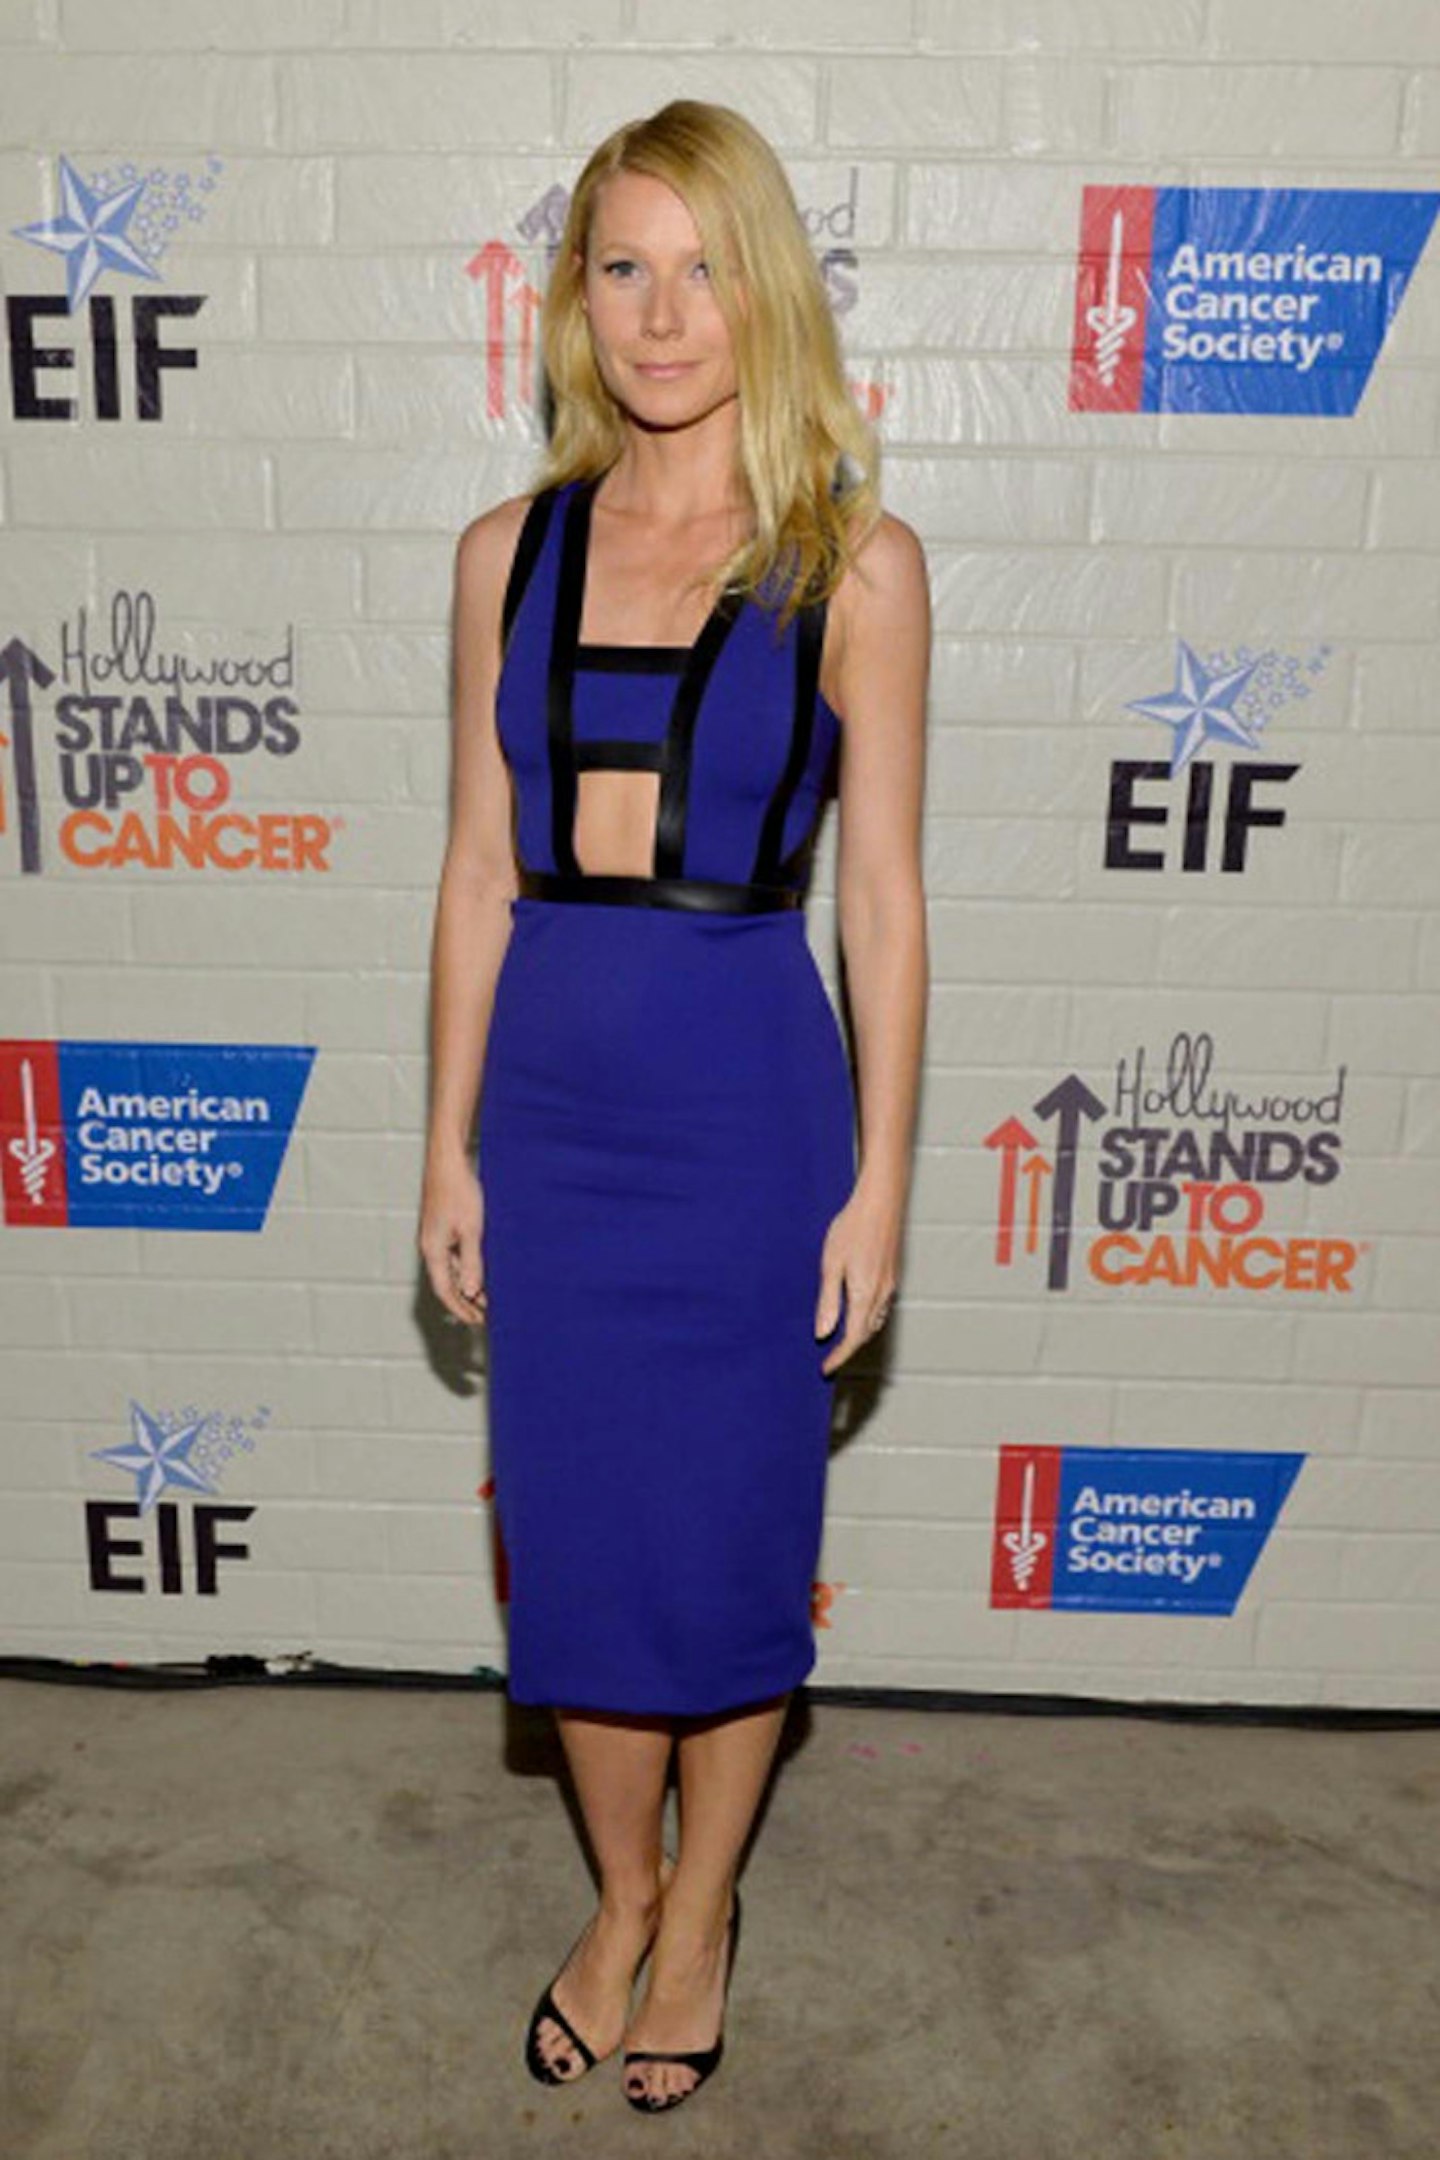 Gwyneth Paltrow attends Hollywood Stands Up To Cancer Event, January 2014